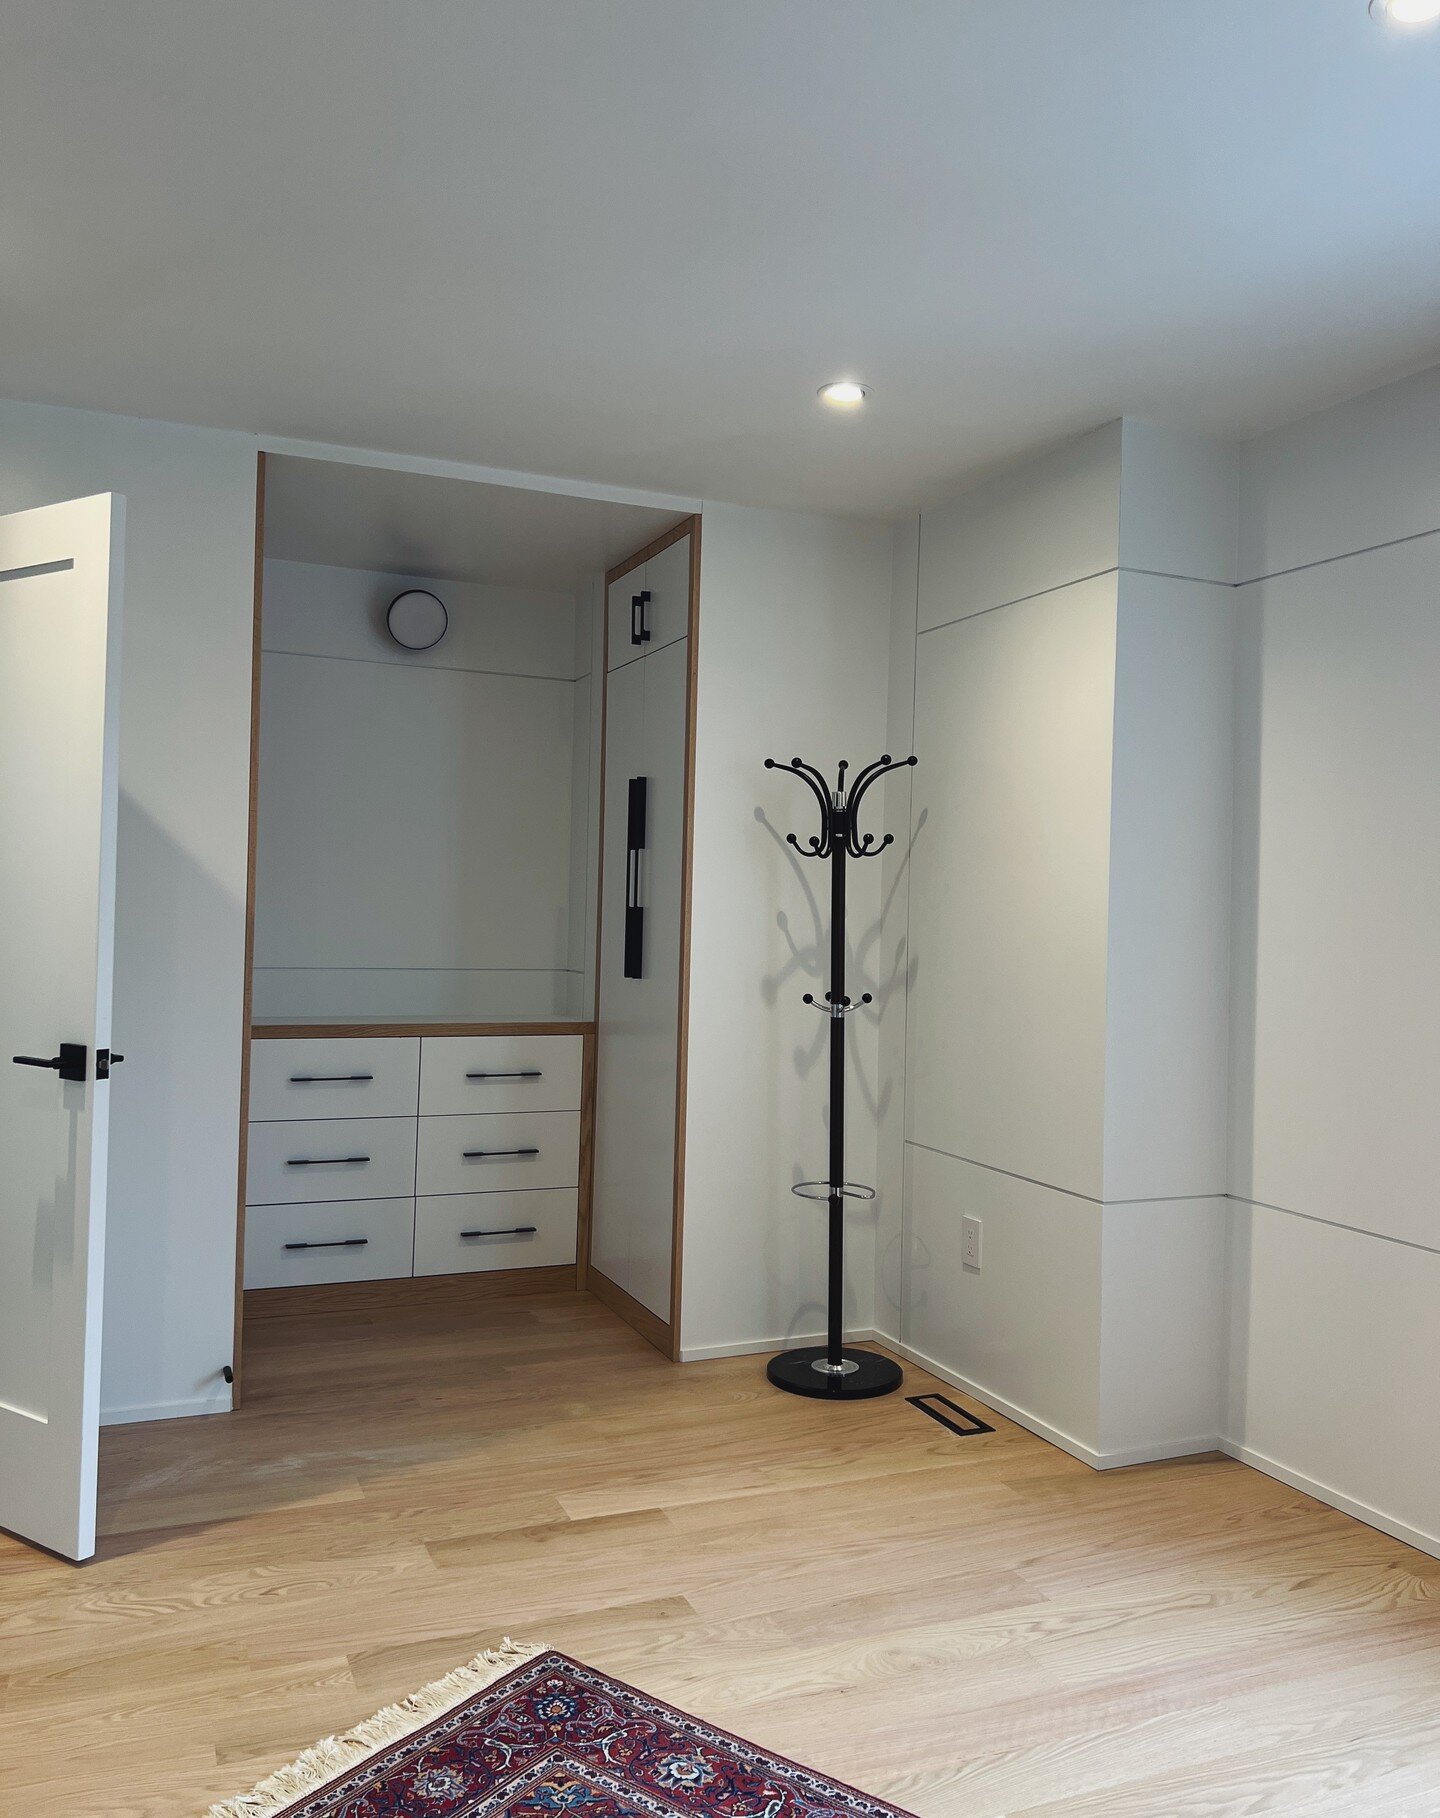 Introducing the built-in closet in the same house as the last picture. The oak gables style ensures cohesive designs throughout the entire home. We've also covered the adjacent wall in MDF to bring everything together seamlessly. 

#BuiltInCloset #Ho